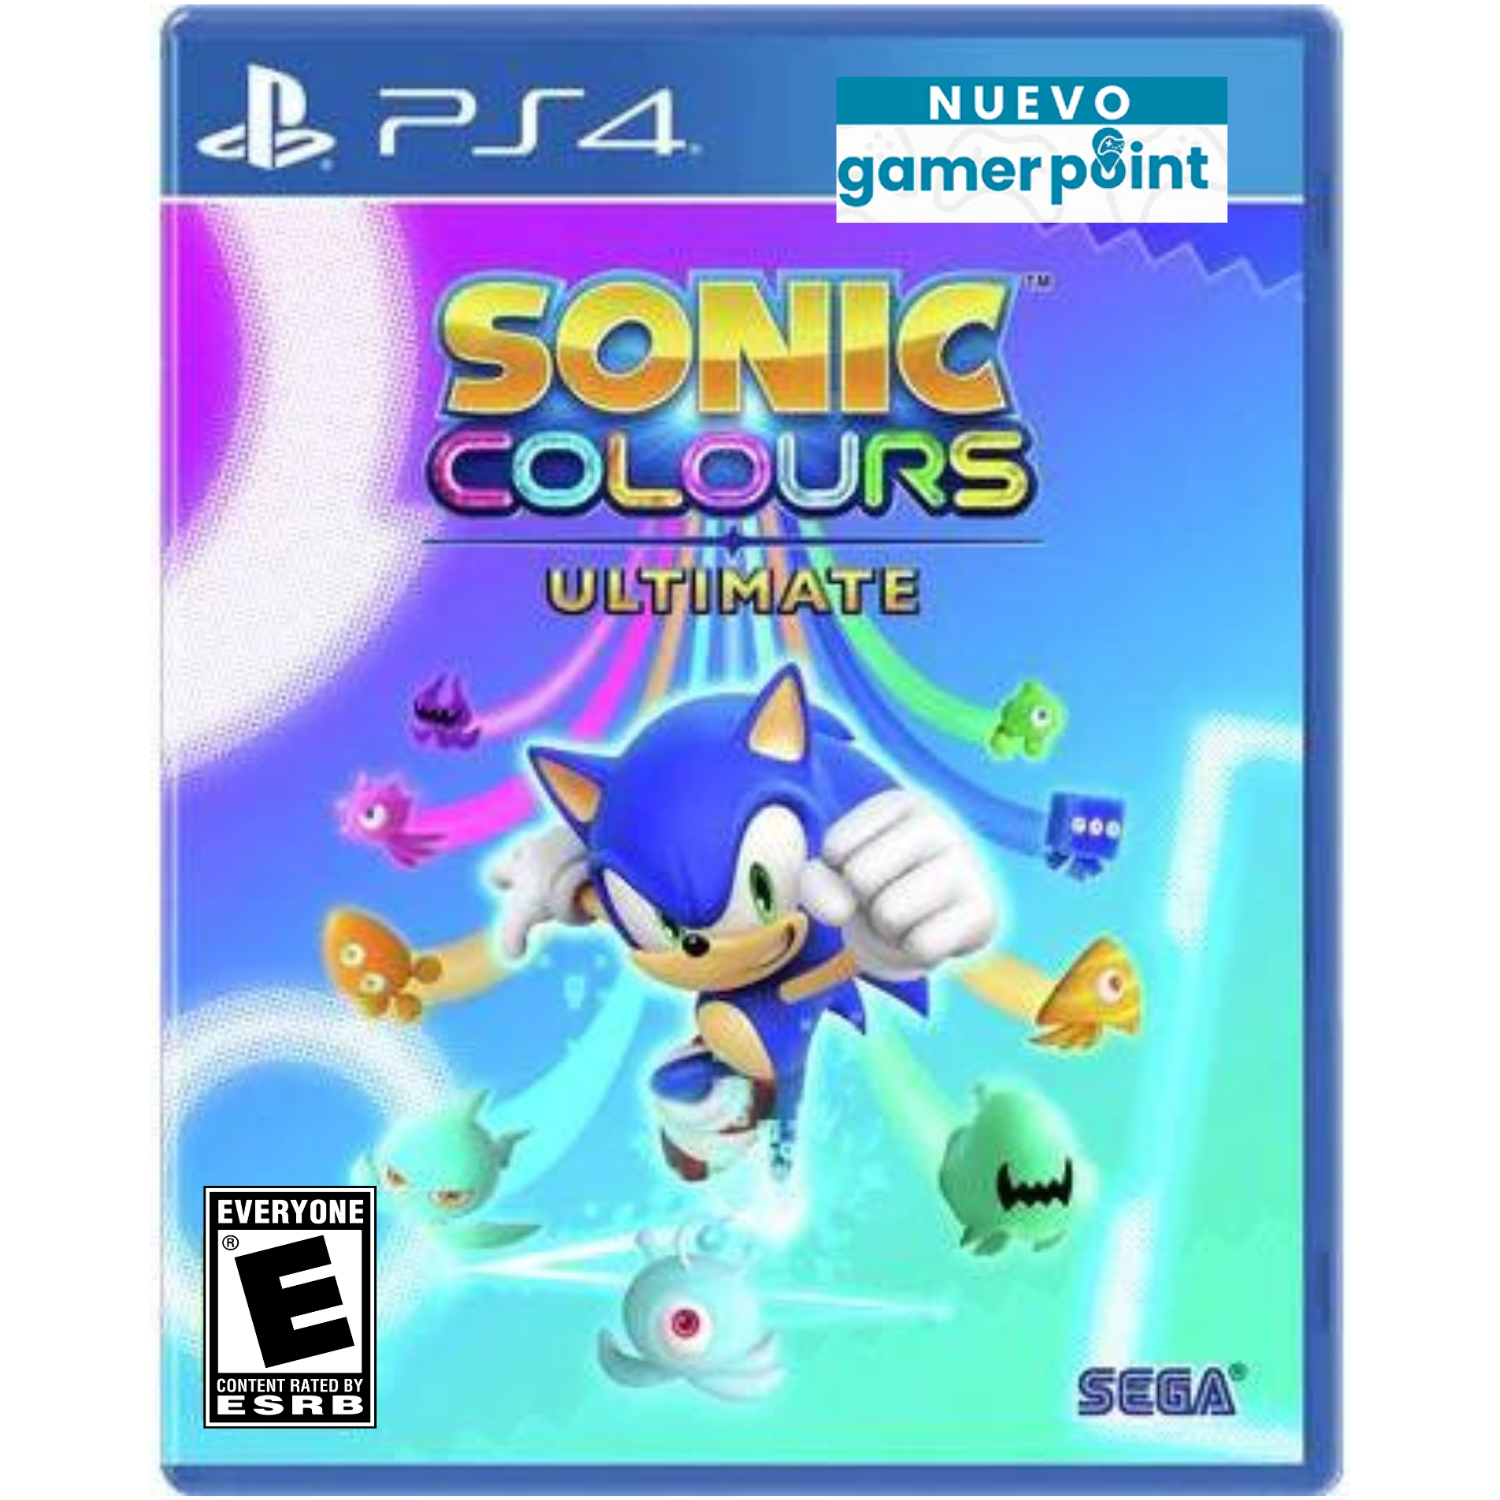 Sonic Colors Ultimate Standard Edition Ps4